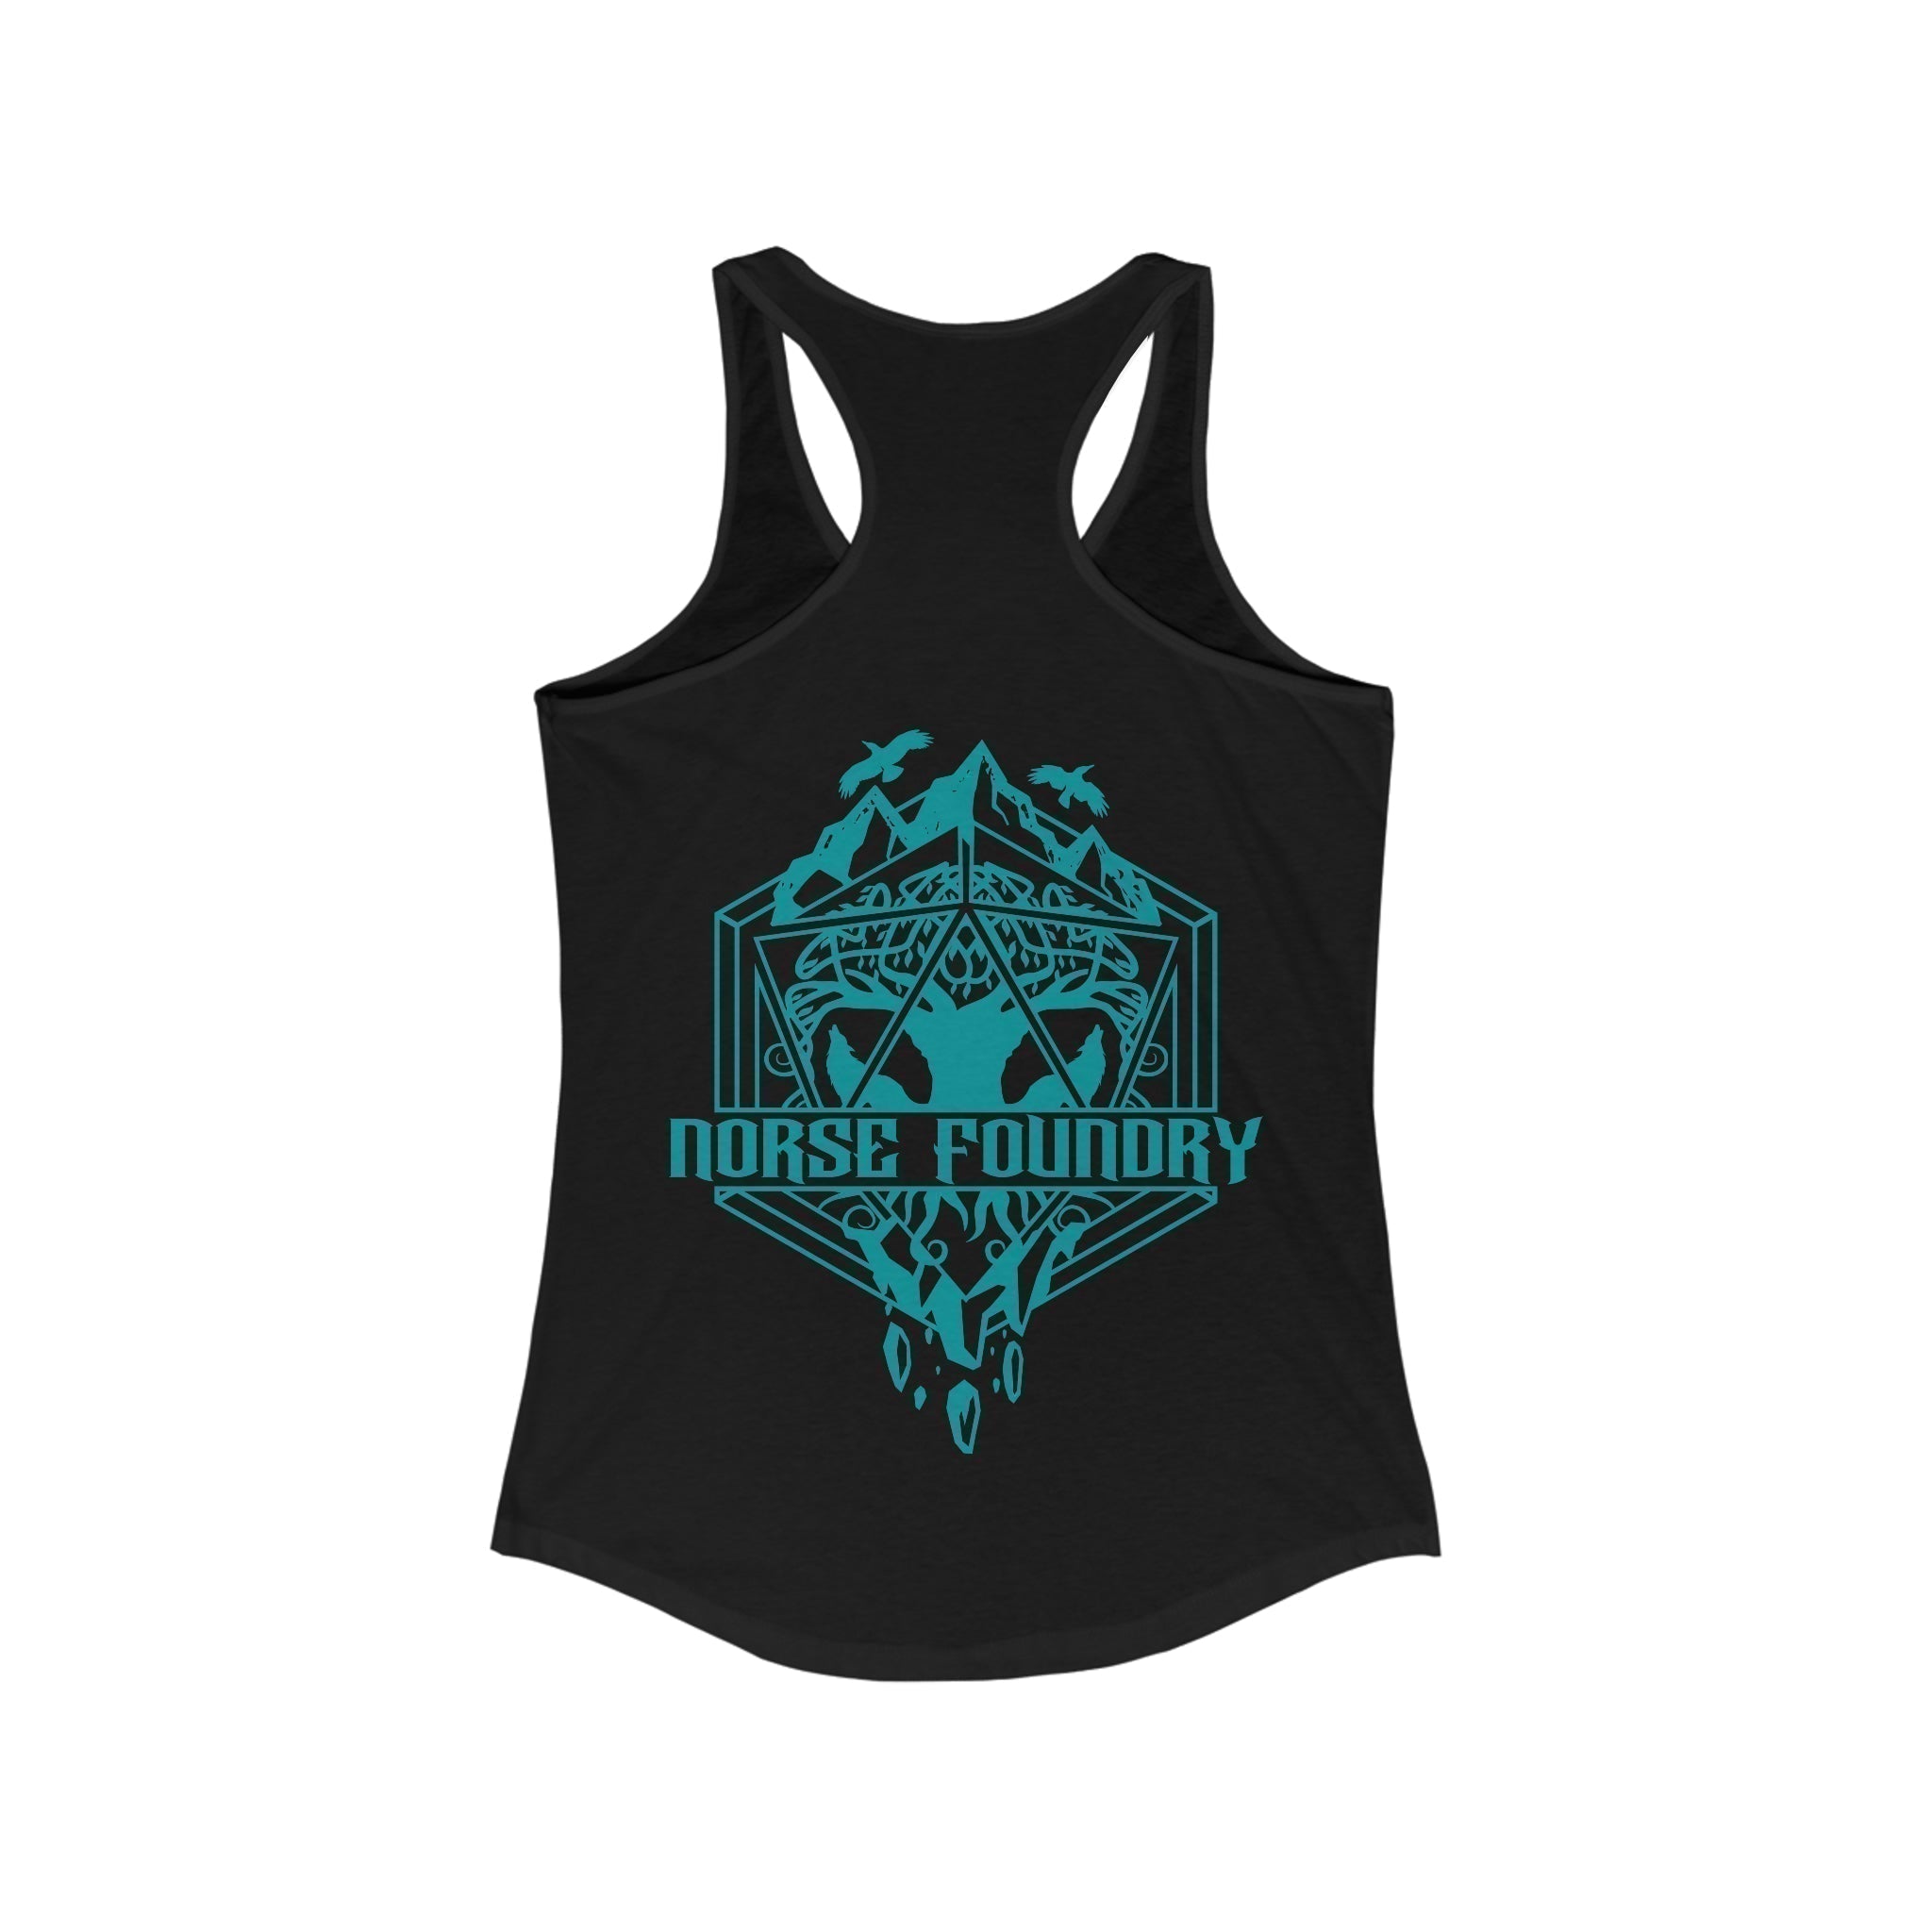 Roll for Adventure - Norse Foundry Women's Tank Top - 24469122693662855260